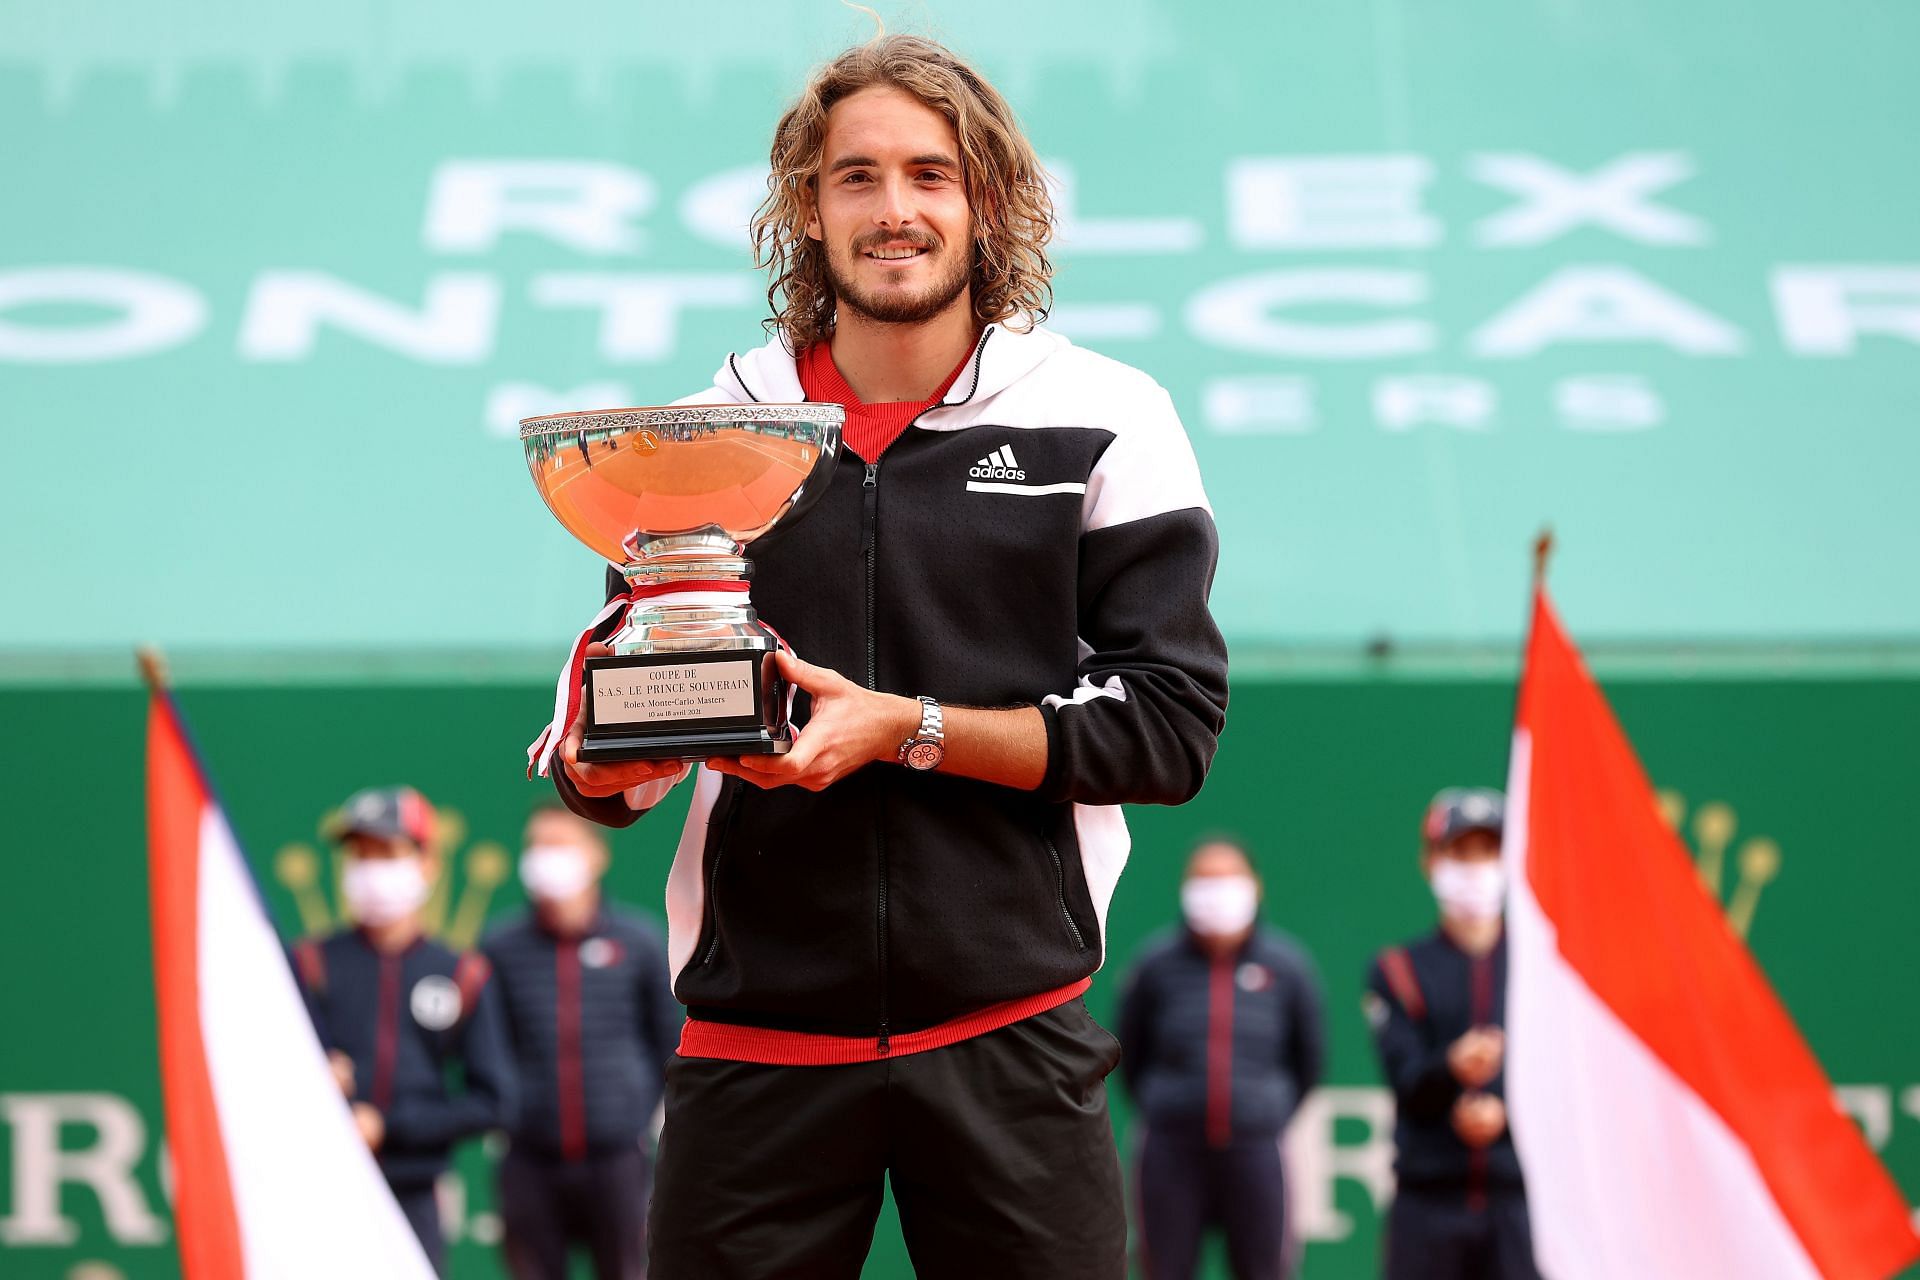 Stefanos Tsitsipas is the defending champion at the Rolex Monte-Carlo Masters